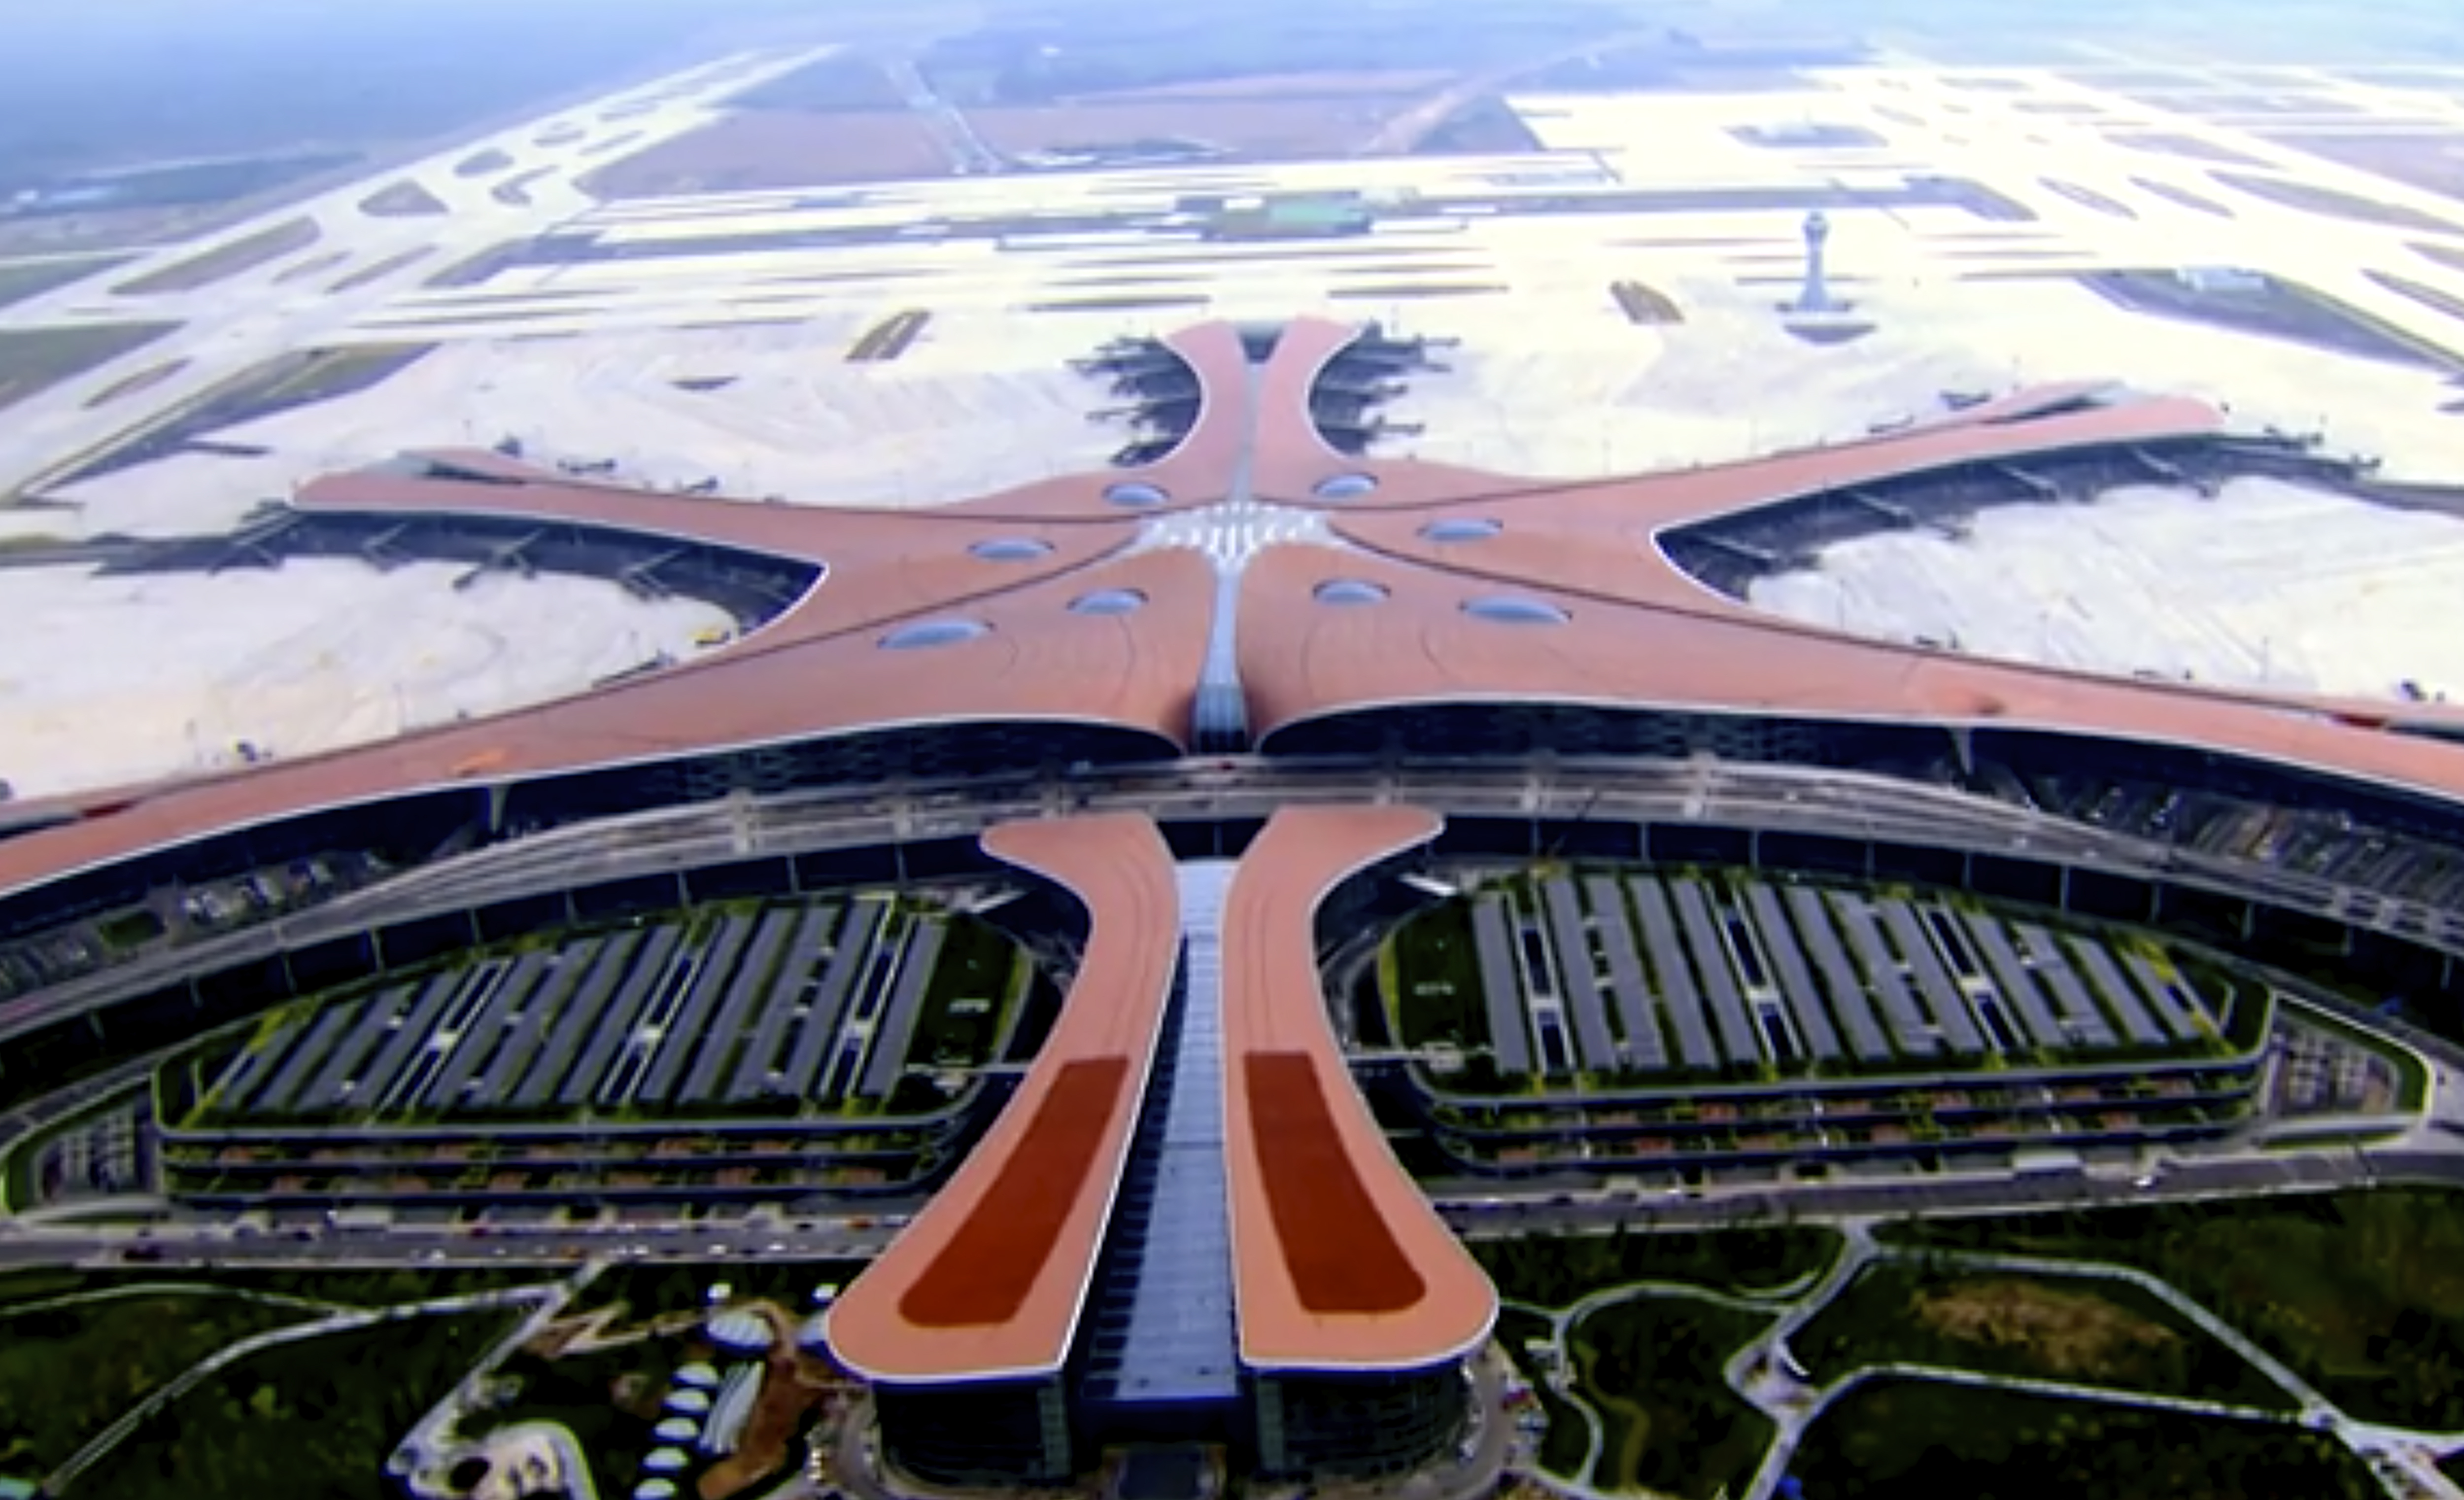 In this image made from CCTV video taken Sept. 17, 2019, an aerial view is seen of the new Beijing Daxing International Airport. The Chinese capital, Beijing, has opened a second international airport with a terminal billed as the world’s biggest. (CCTV via AP)